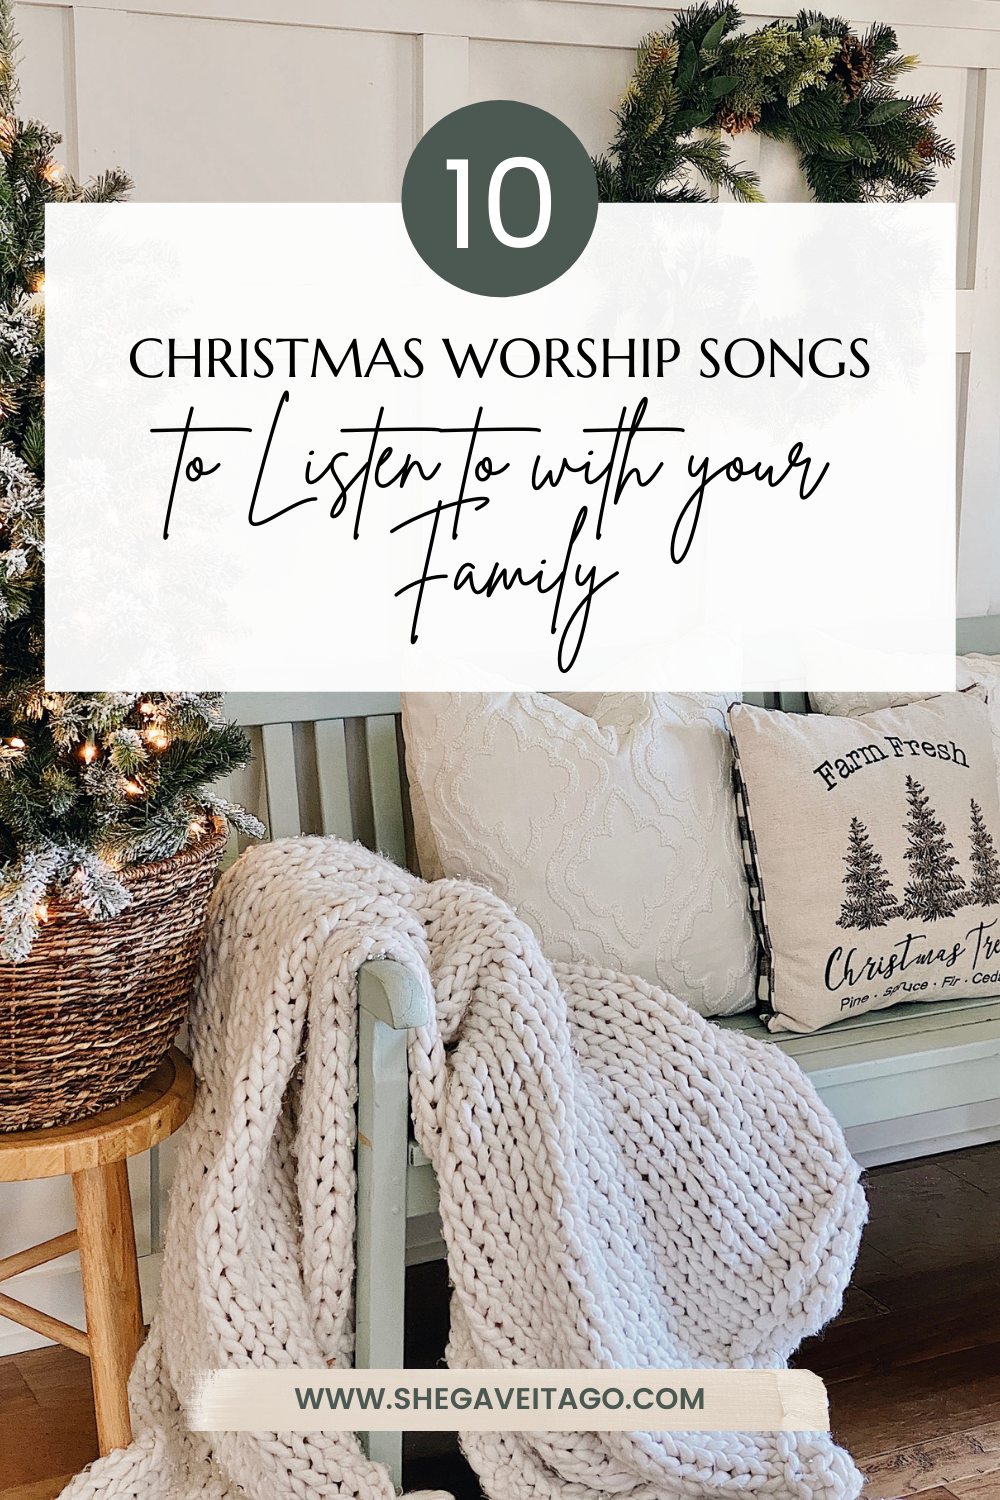 Top 10 Christmas Worship Songs to Listen to with your Family this Holiday Season by She Gave It A Go